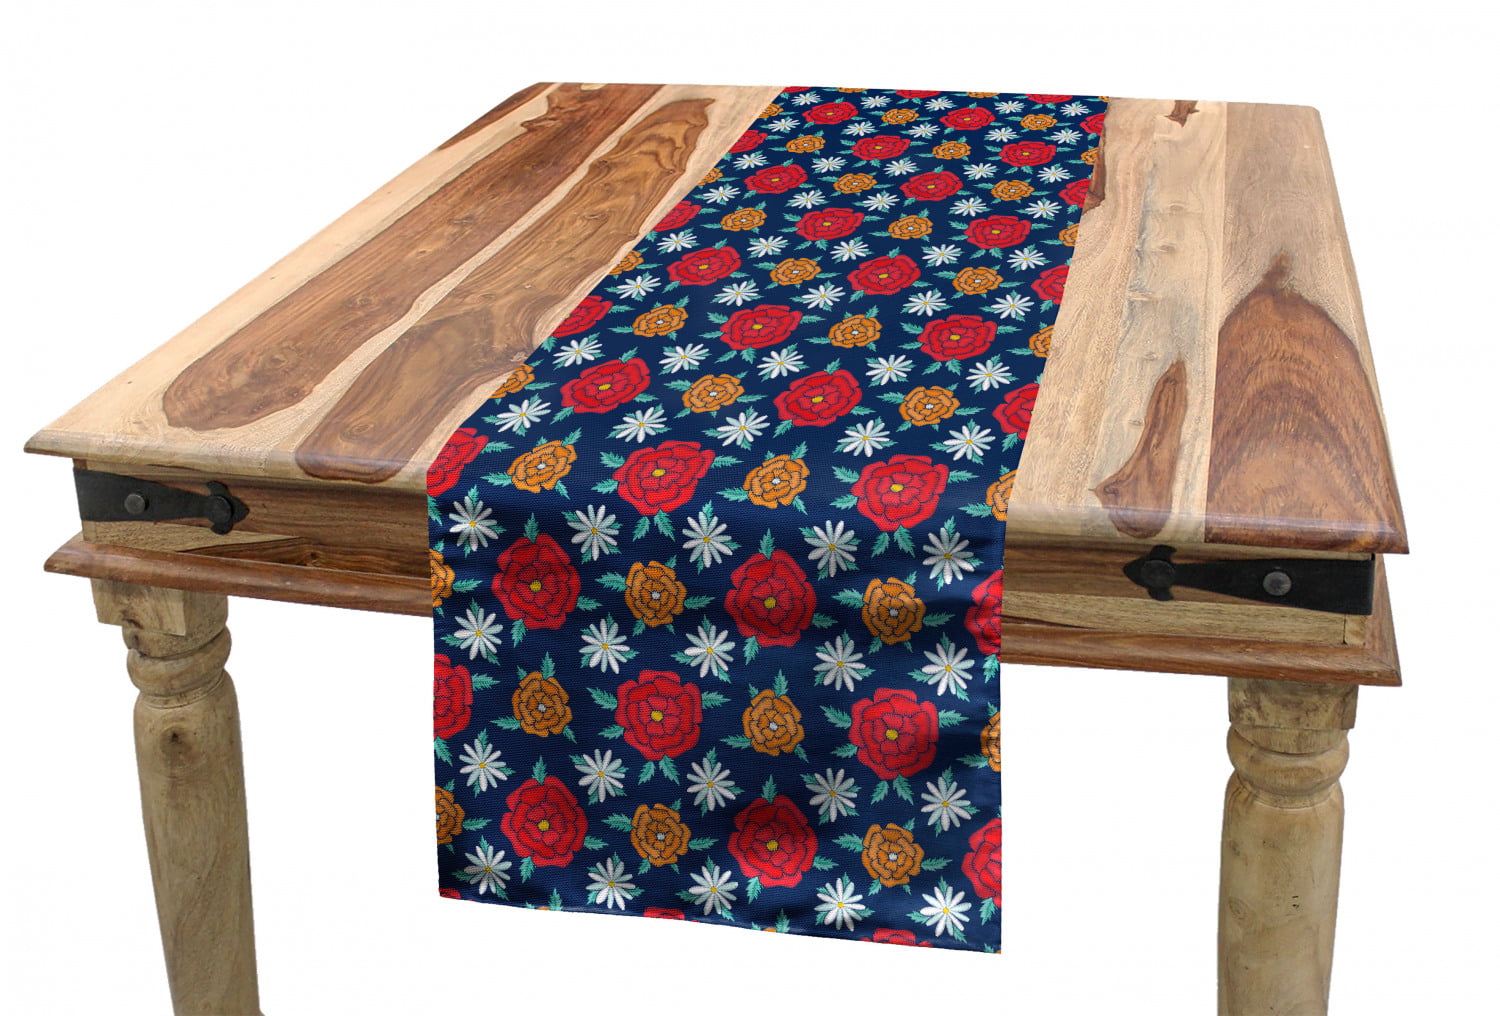 Dining Room Kitchen Rectangular Runner Natural Theme Realistic Flowers Motifs Peonies and Leaves Images Floral Art Multicolor 16 X 120 Ambesonne Botanical Table Runner